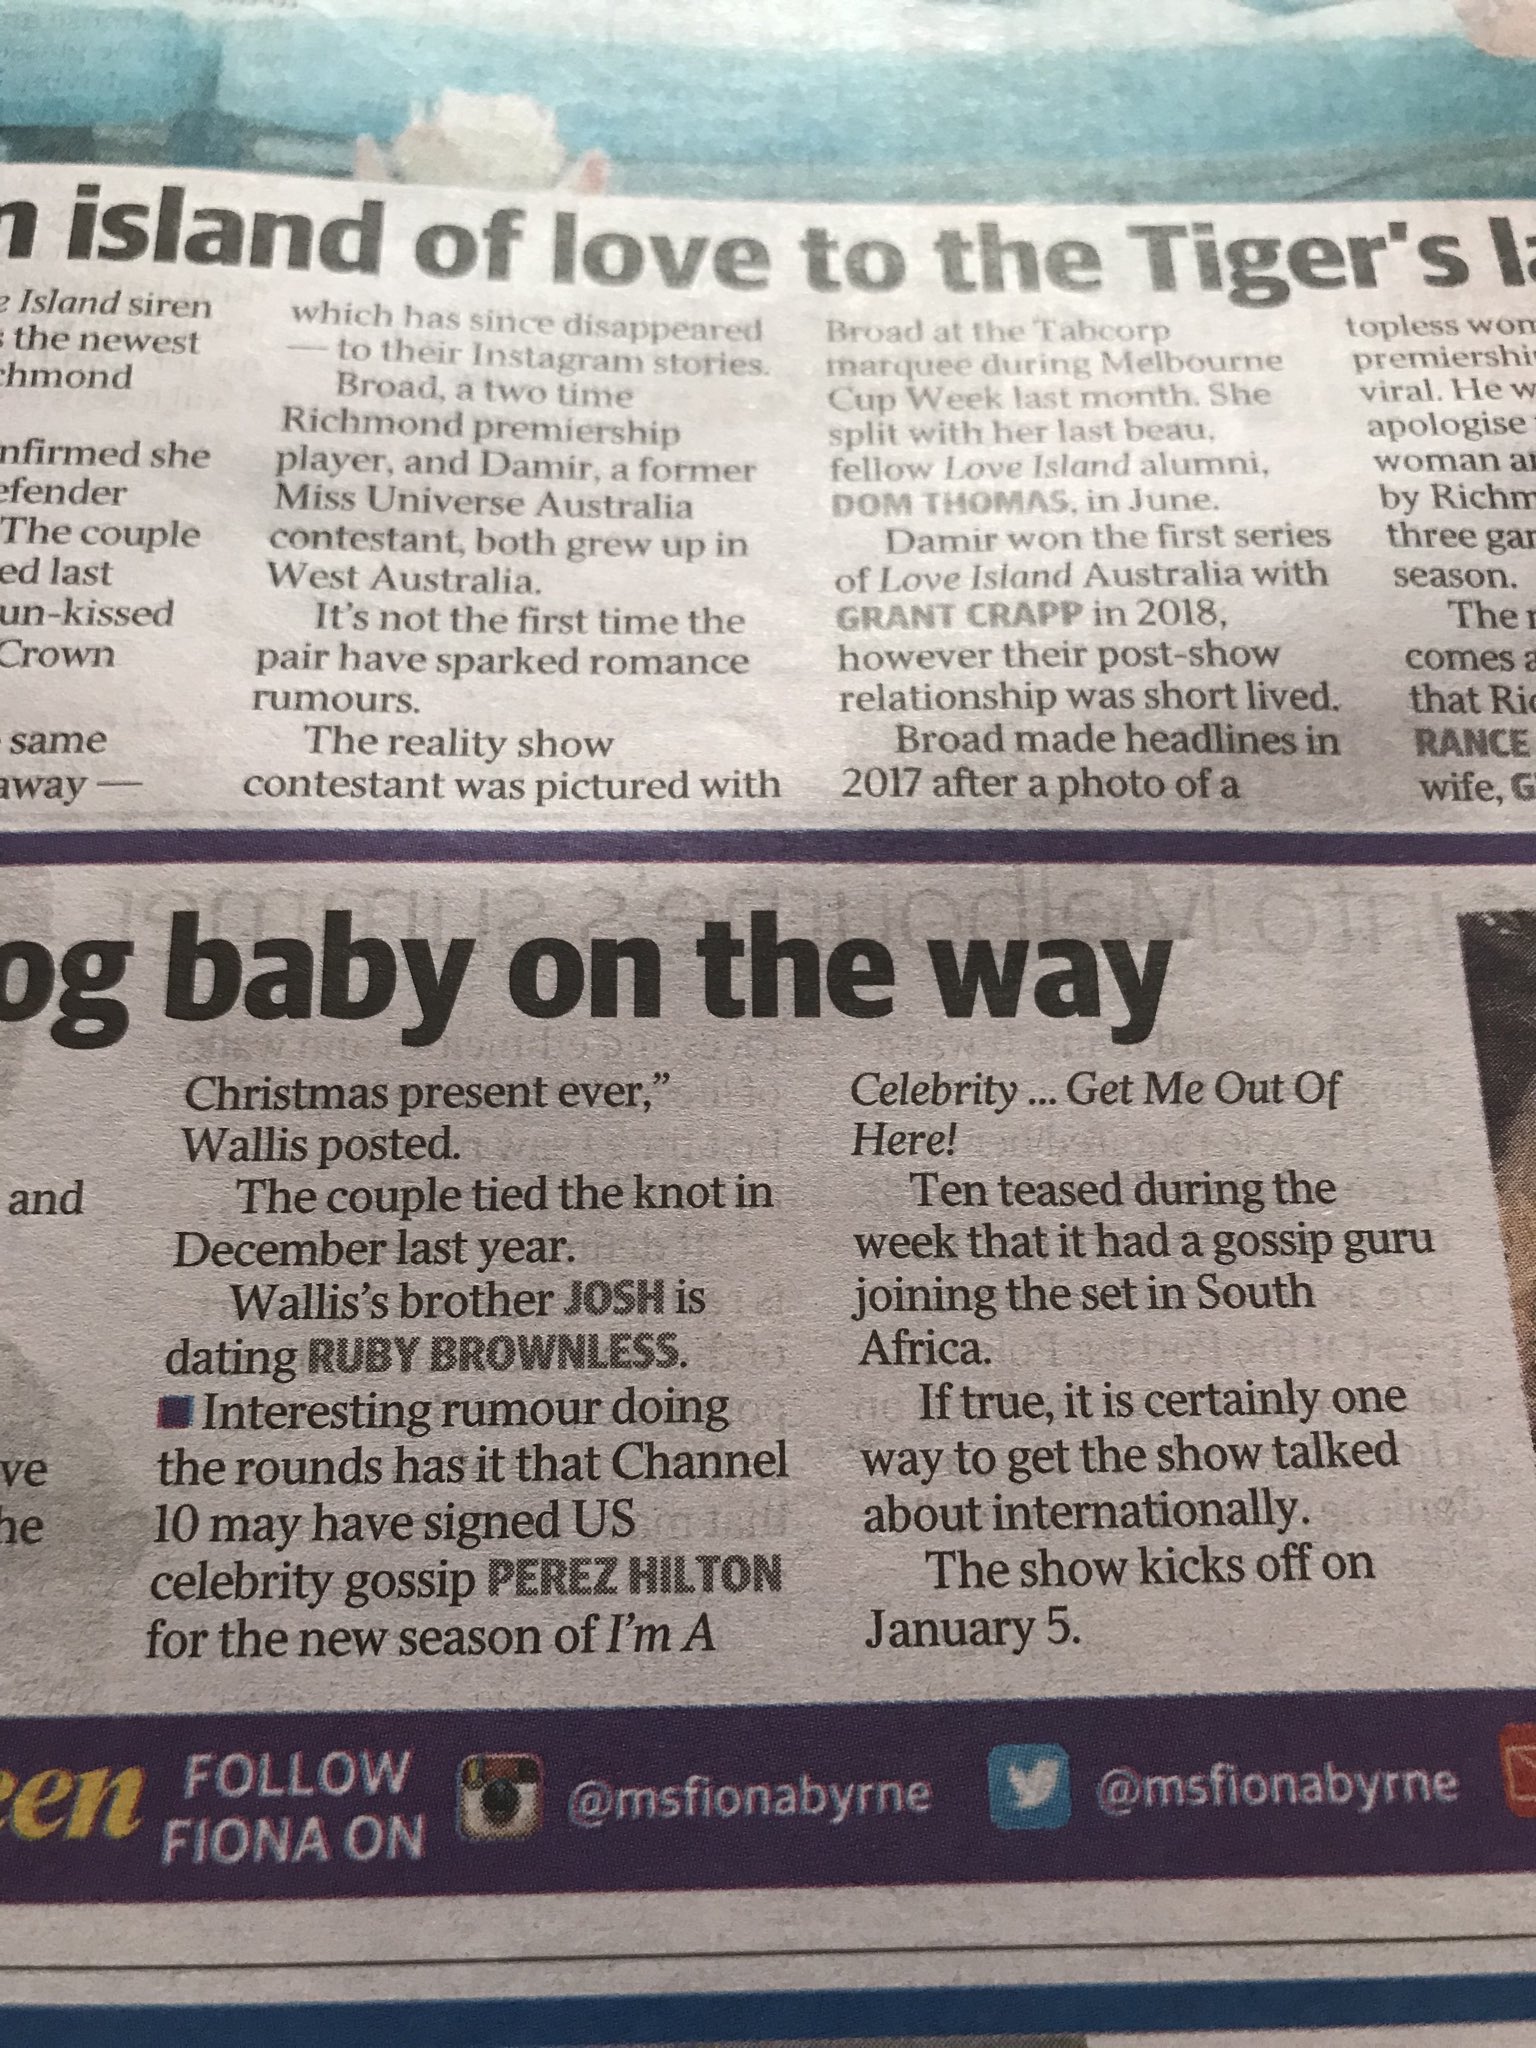 Good headline for dating site in Melbourne